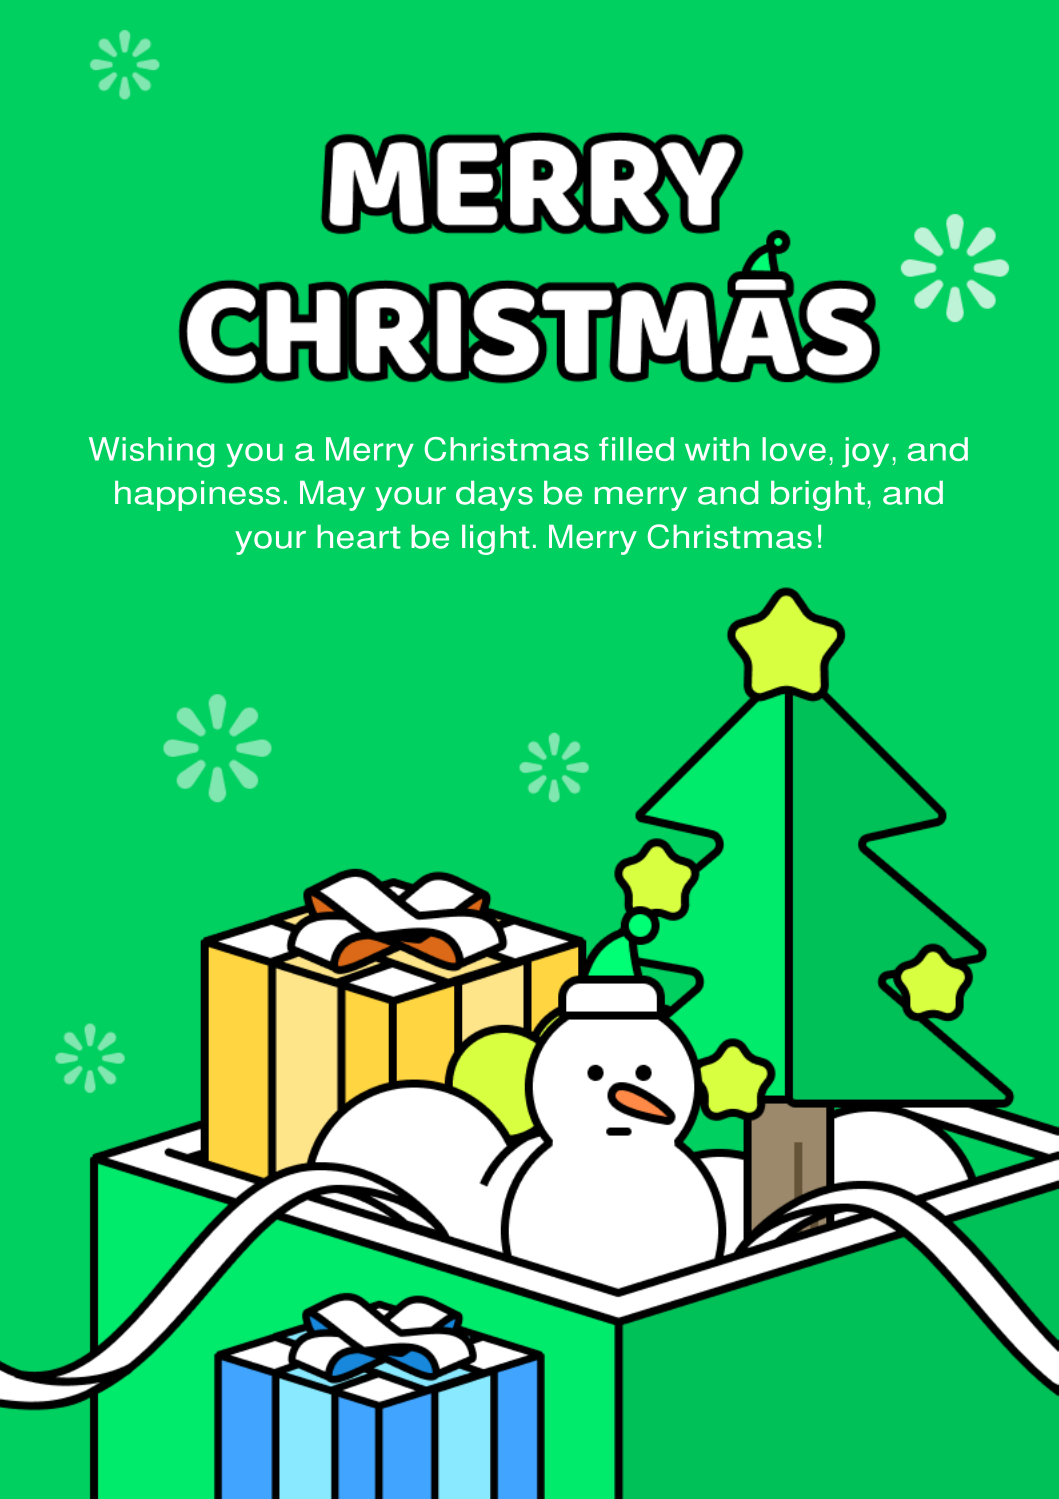 Merry Christmas wishes for love 4